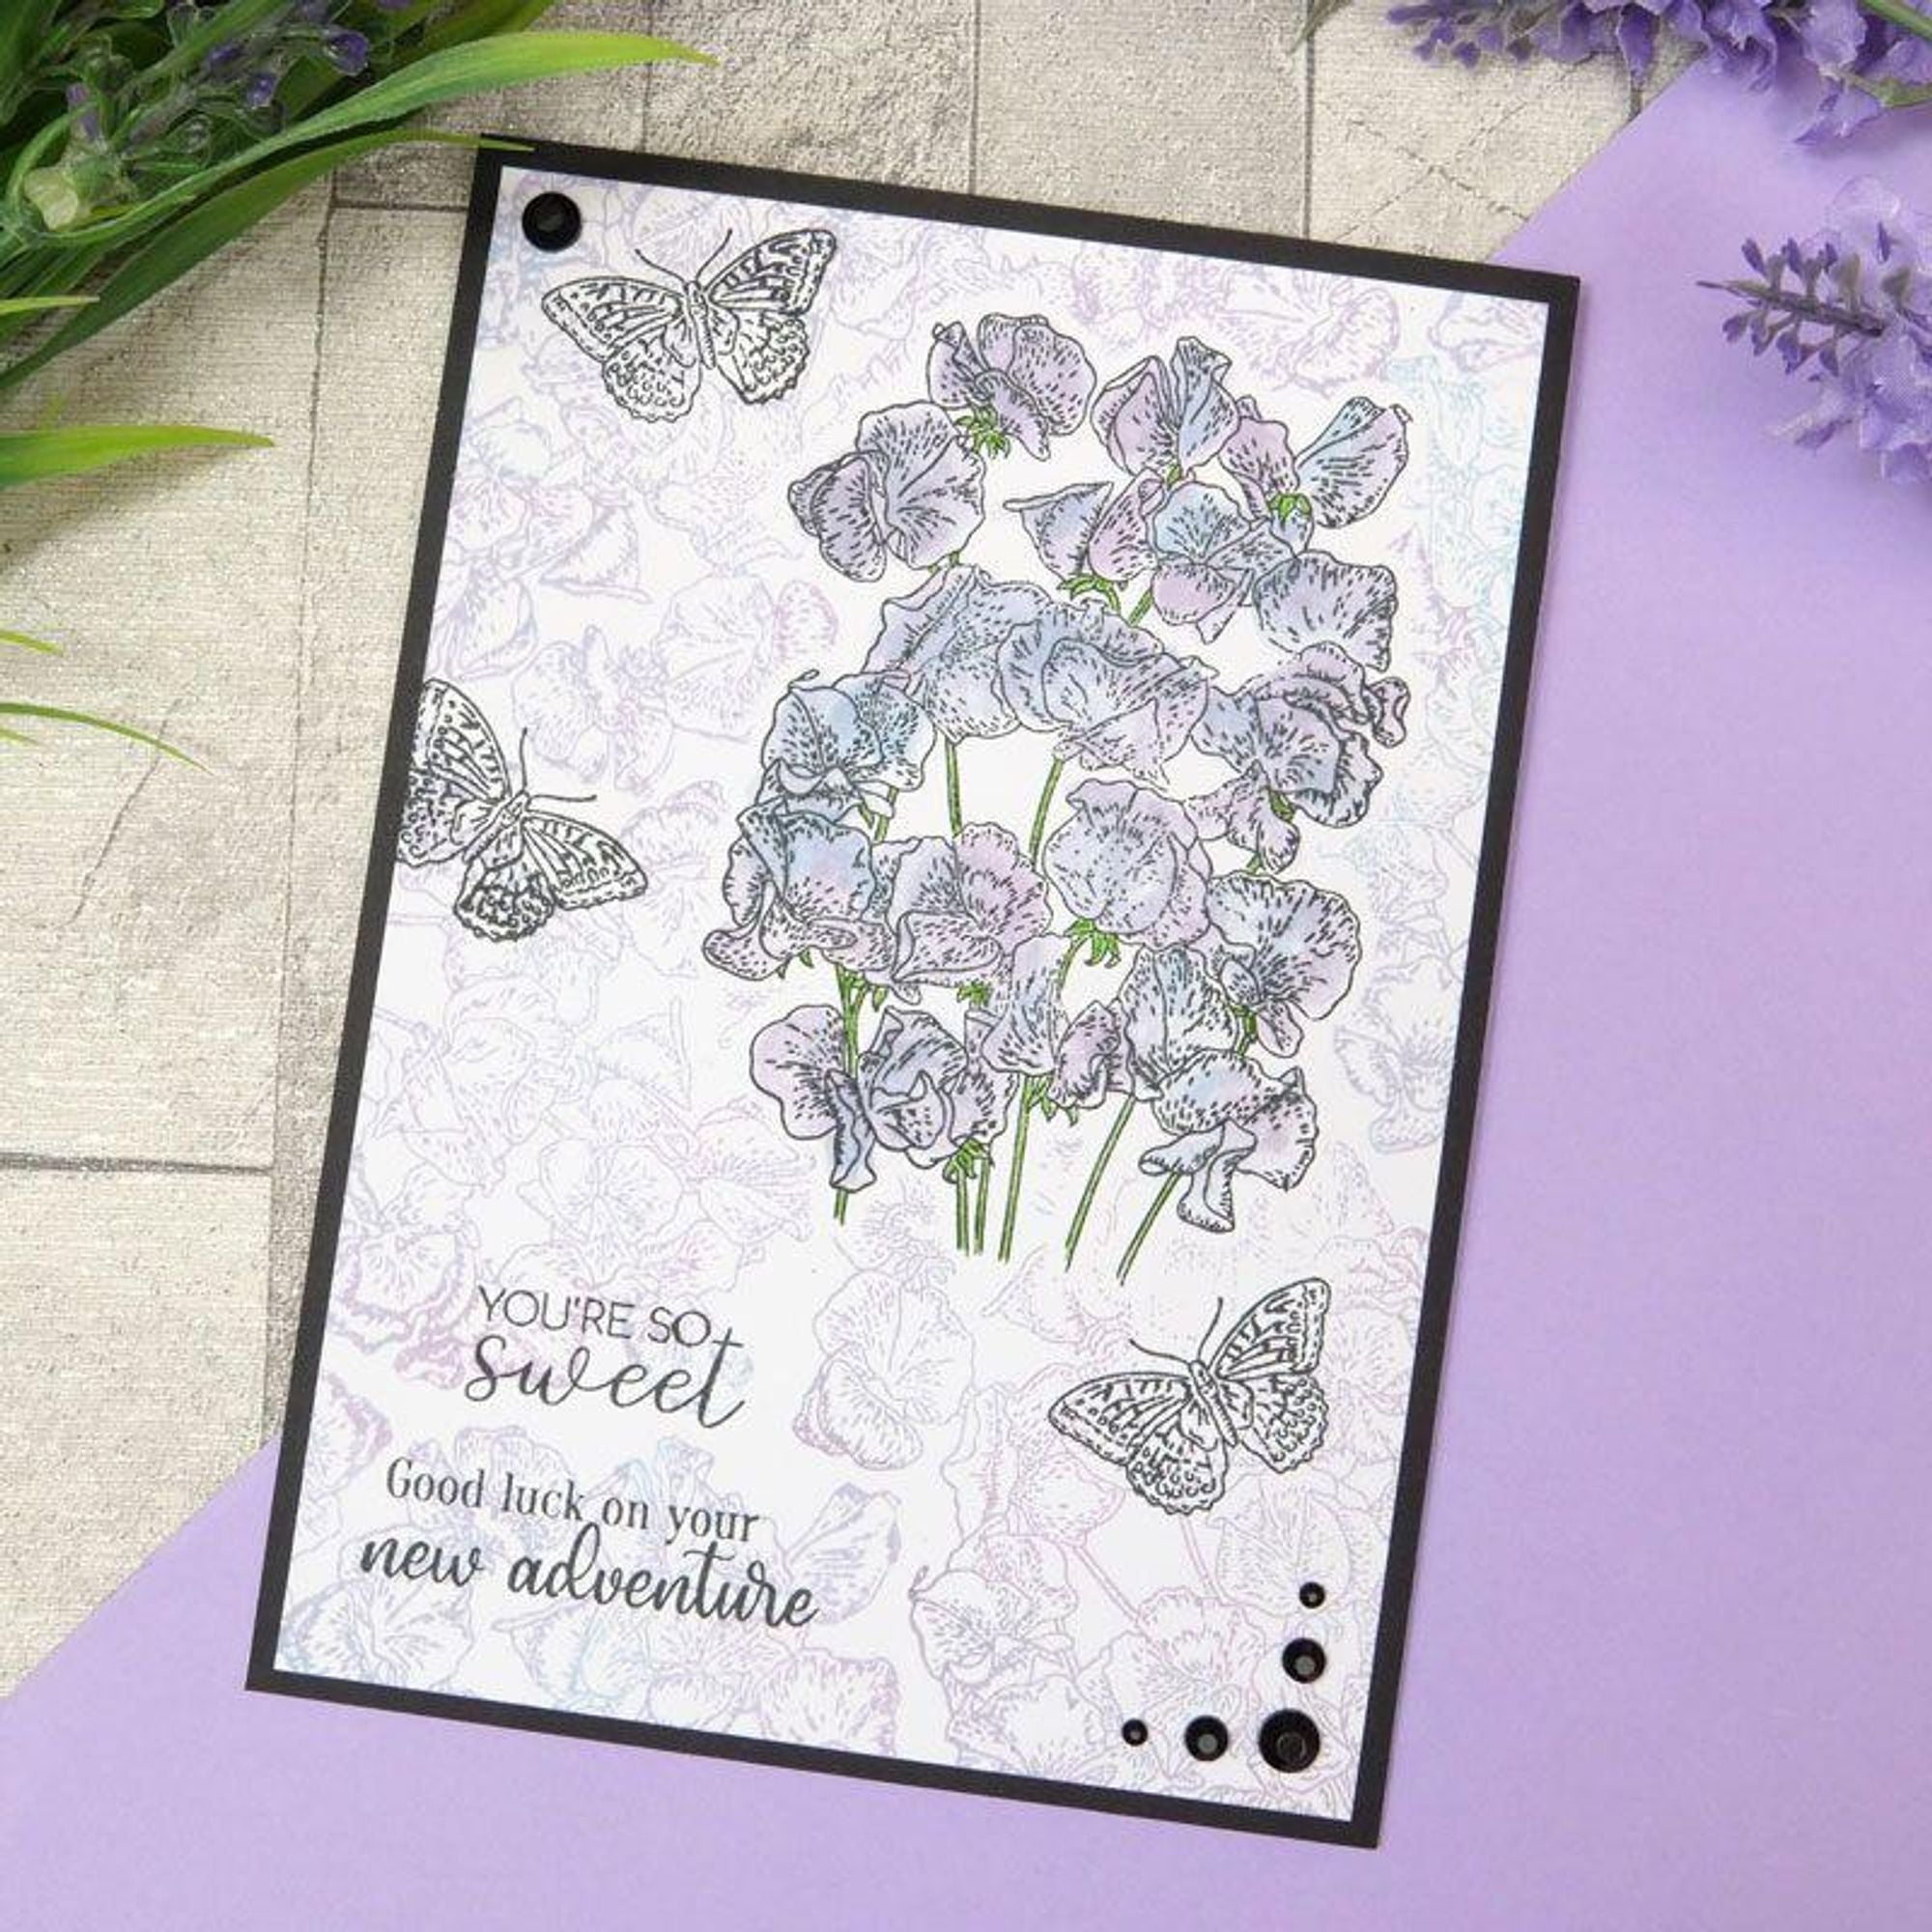 For the Love of Stamps - Sweet Pea Posy A6 Stamp Set